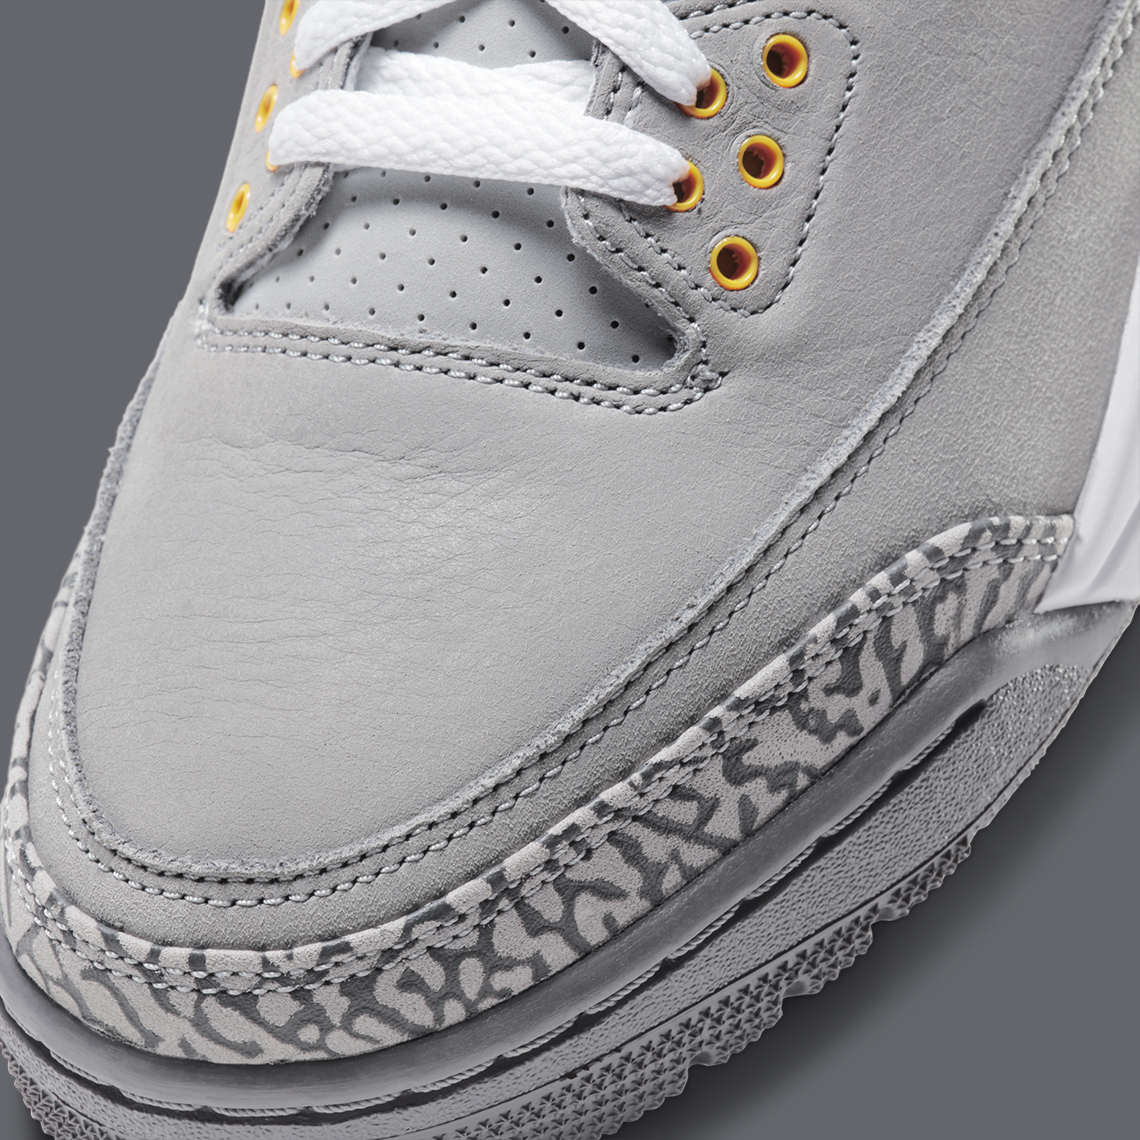 Releasing at jordan xxxiv doors is the Retro Cool Grey Ct8532 012 Official Images 8